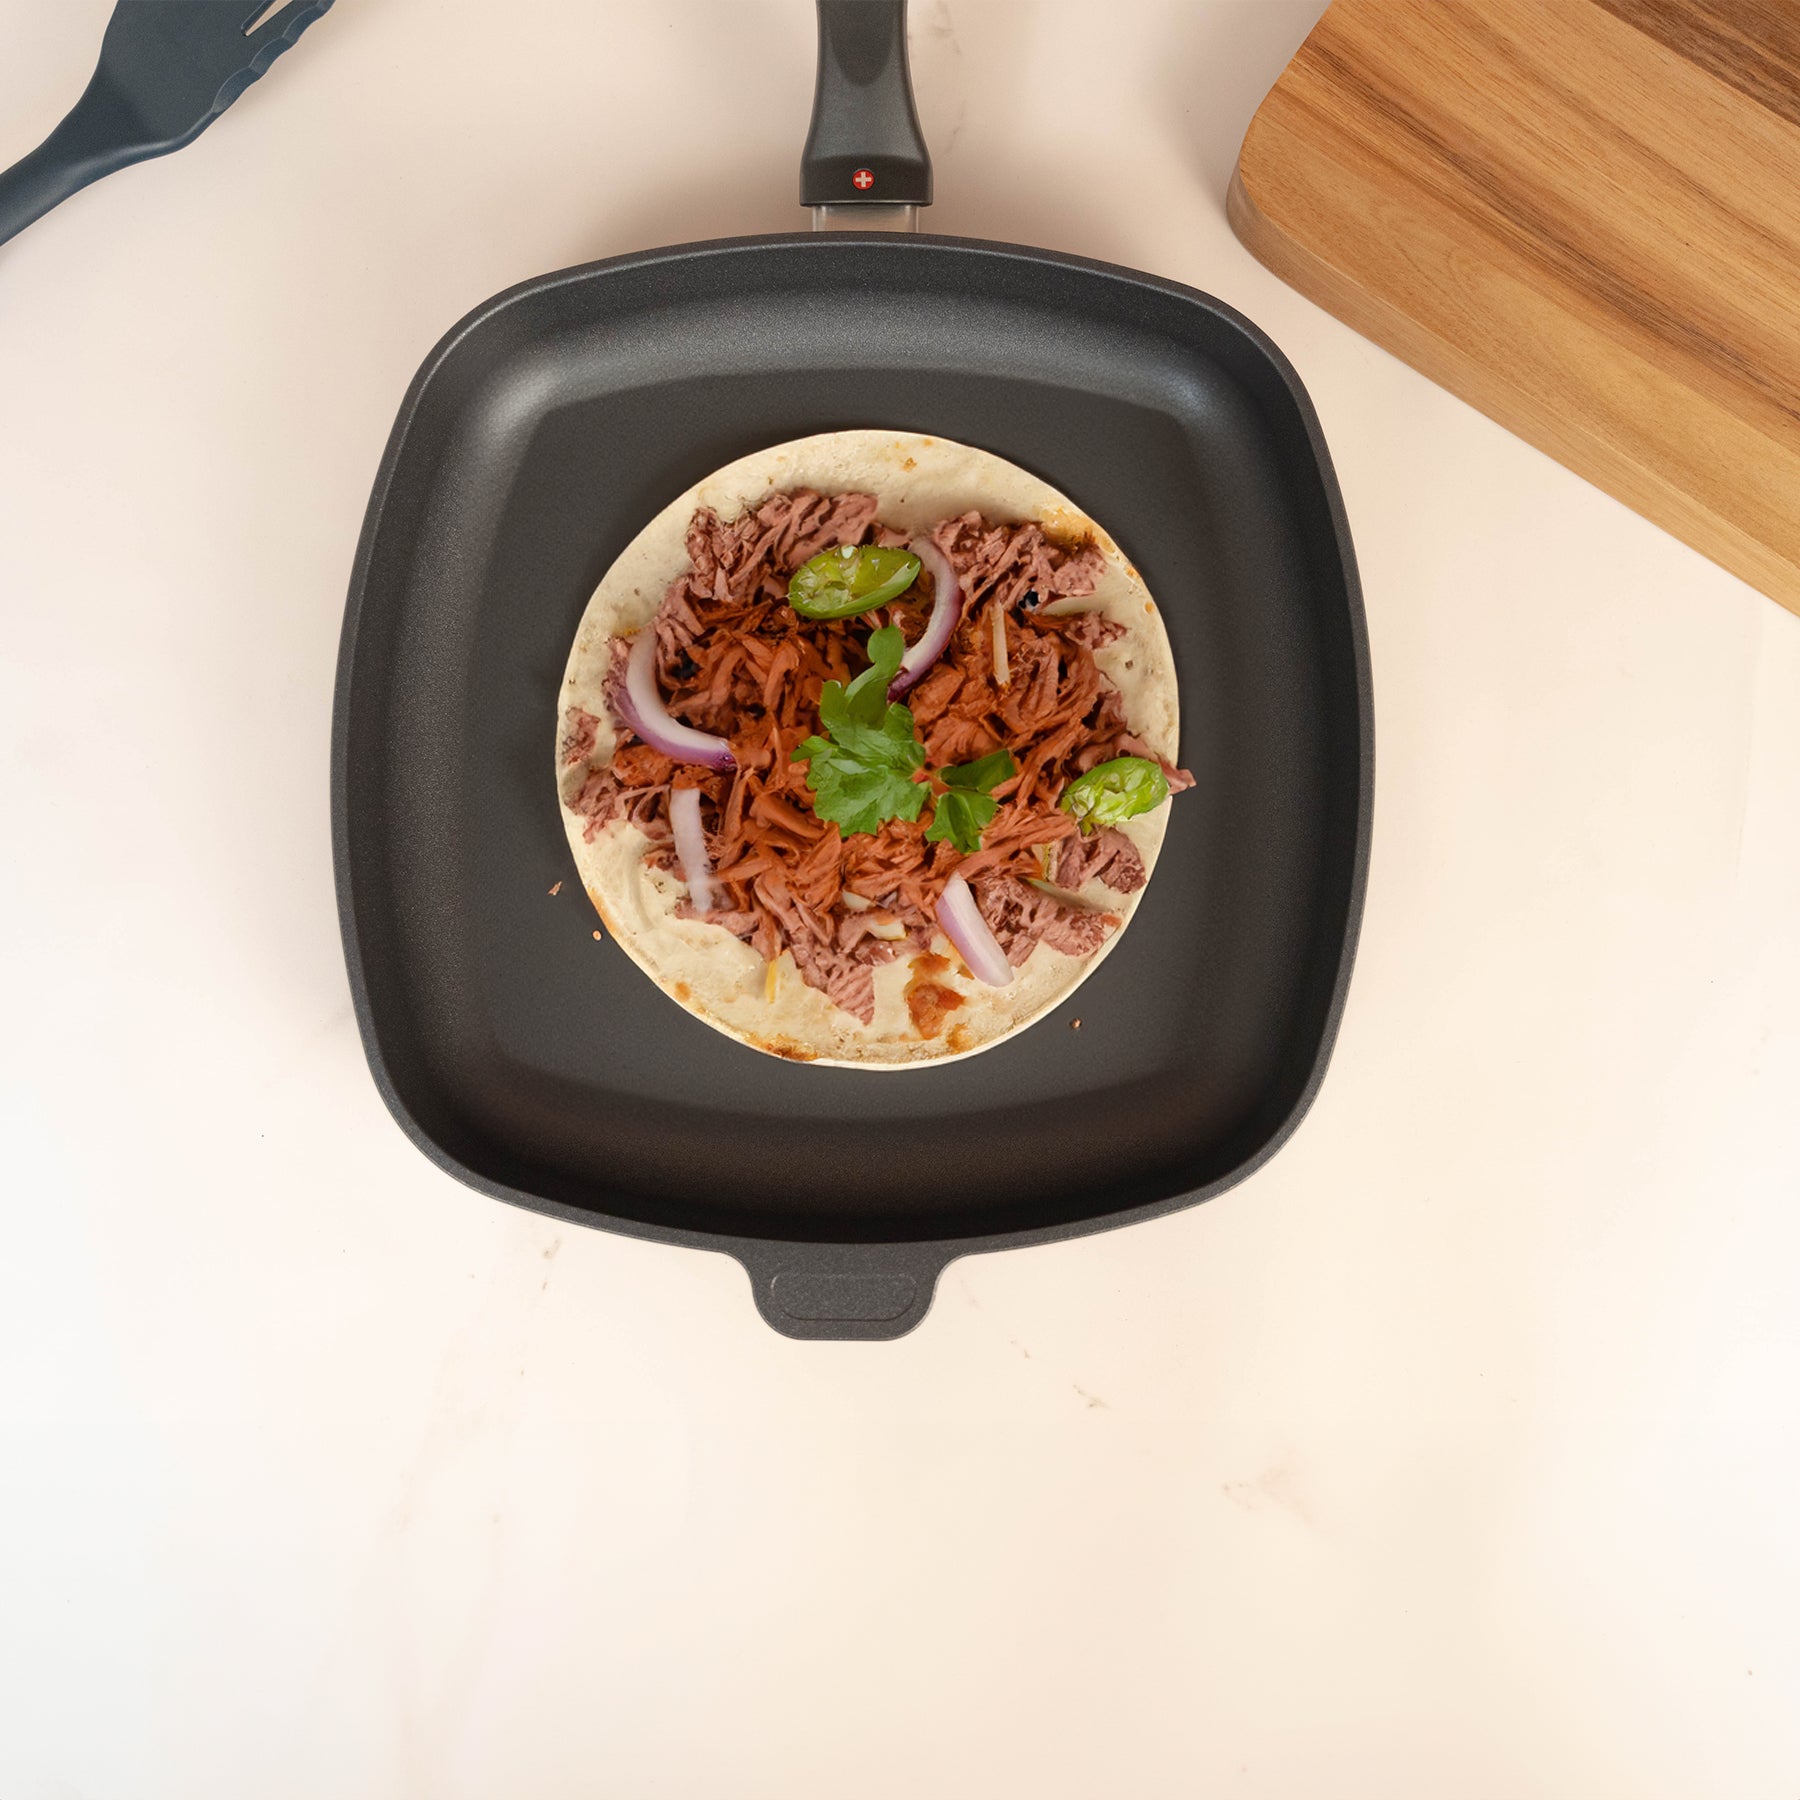 HD Nonstick 11" x 11" Square Fry Pan in use with food on pan